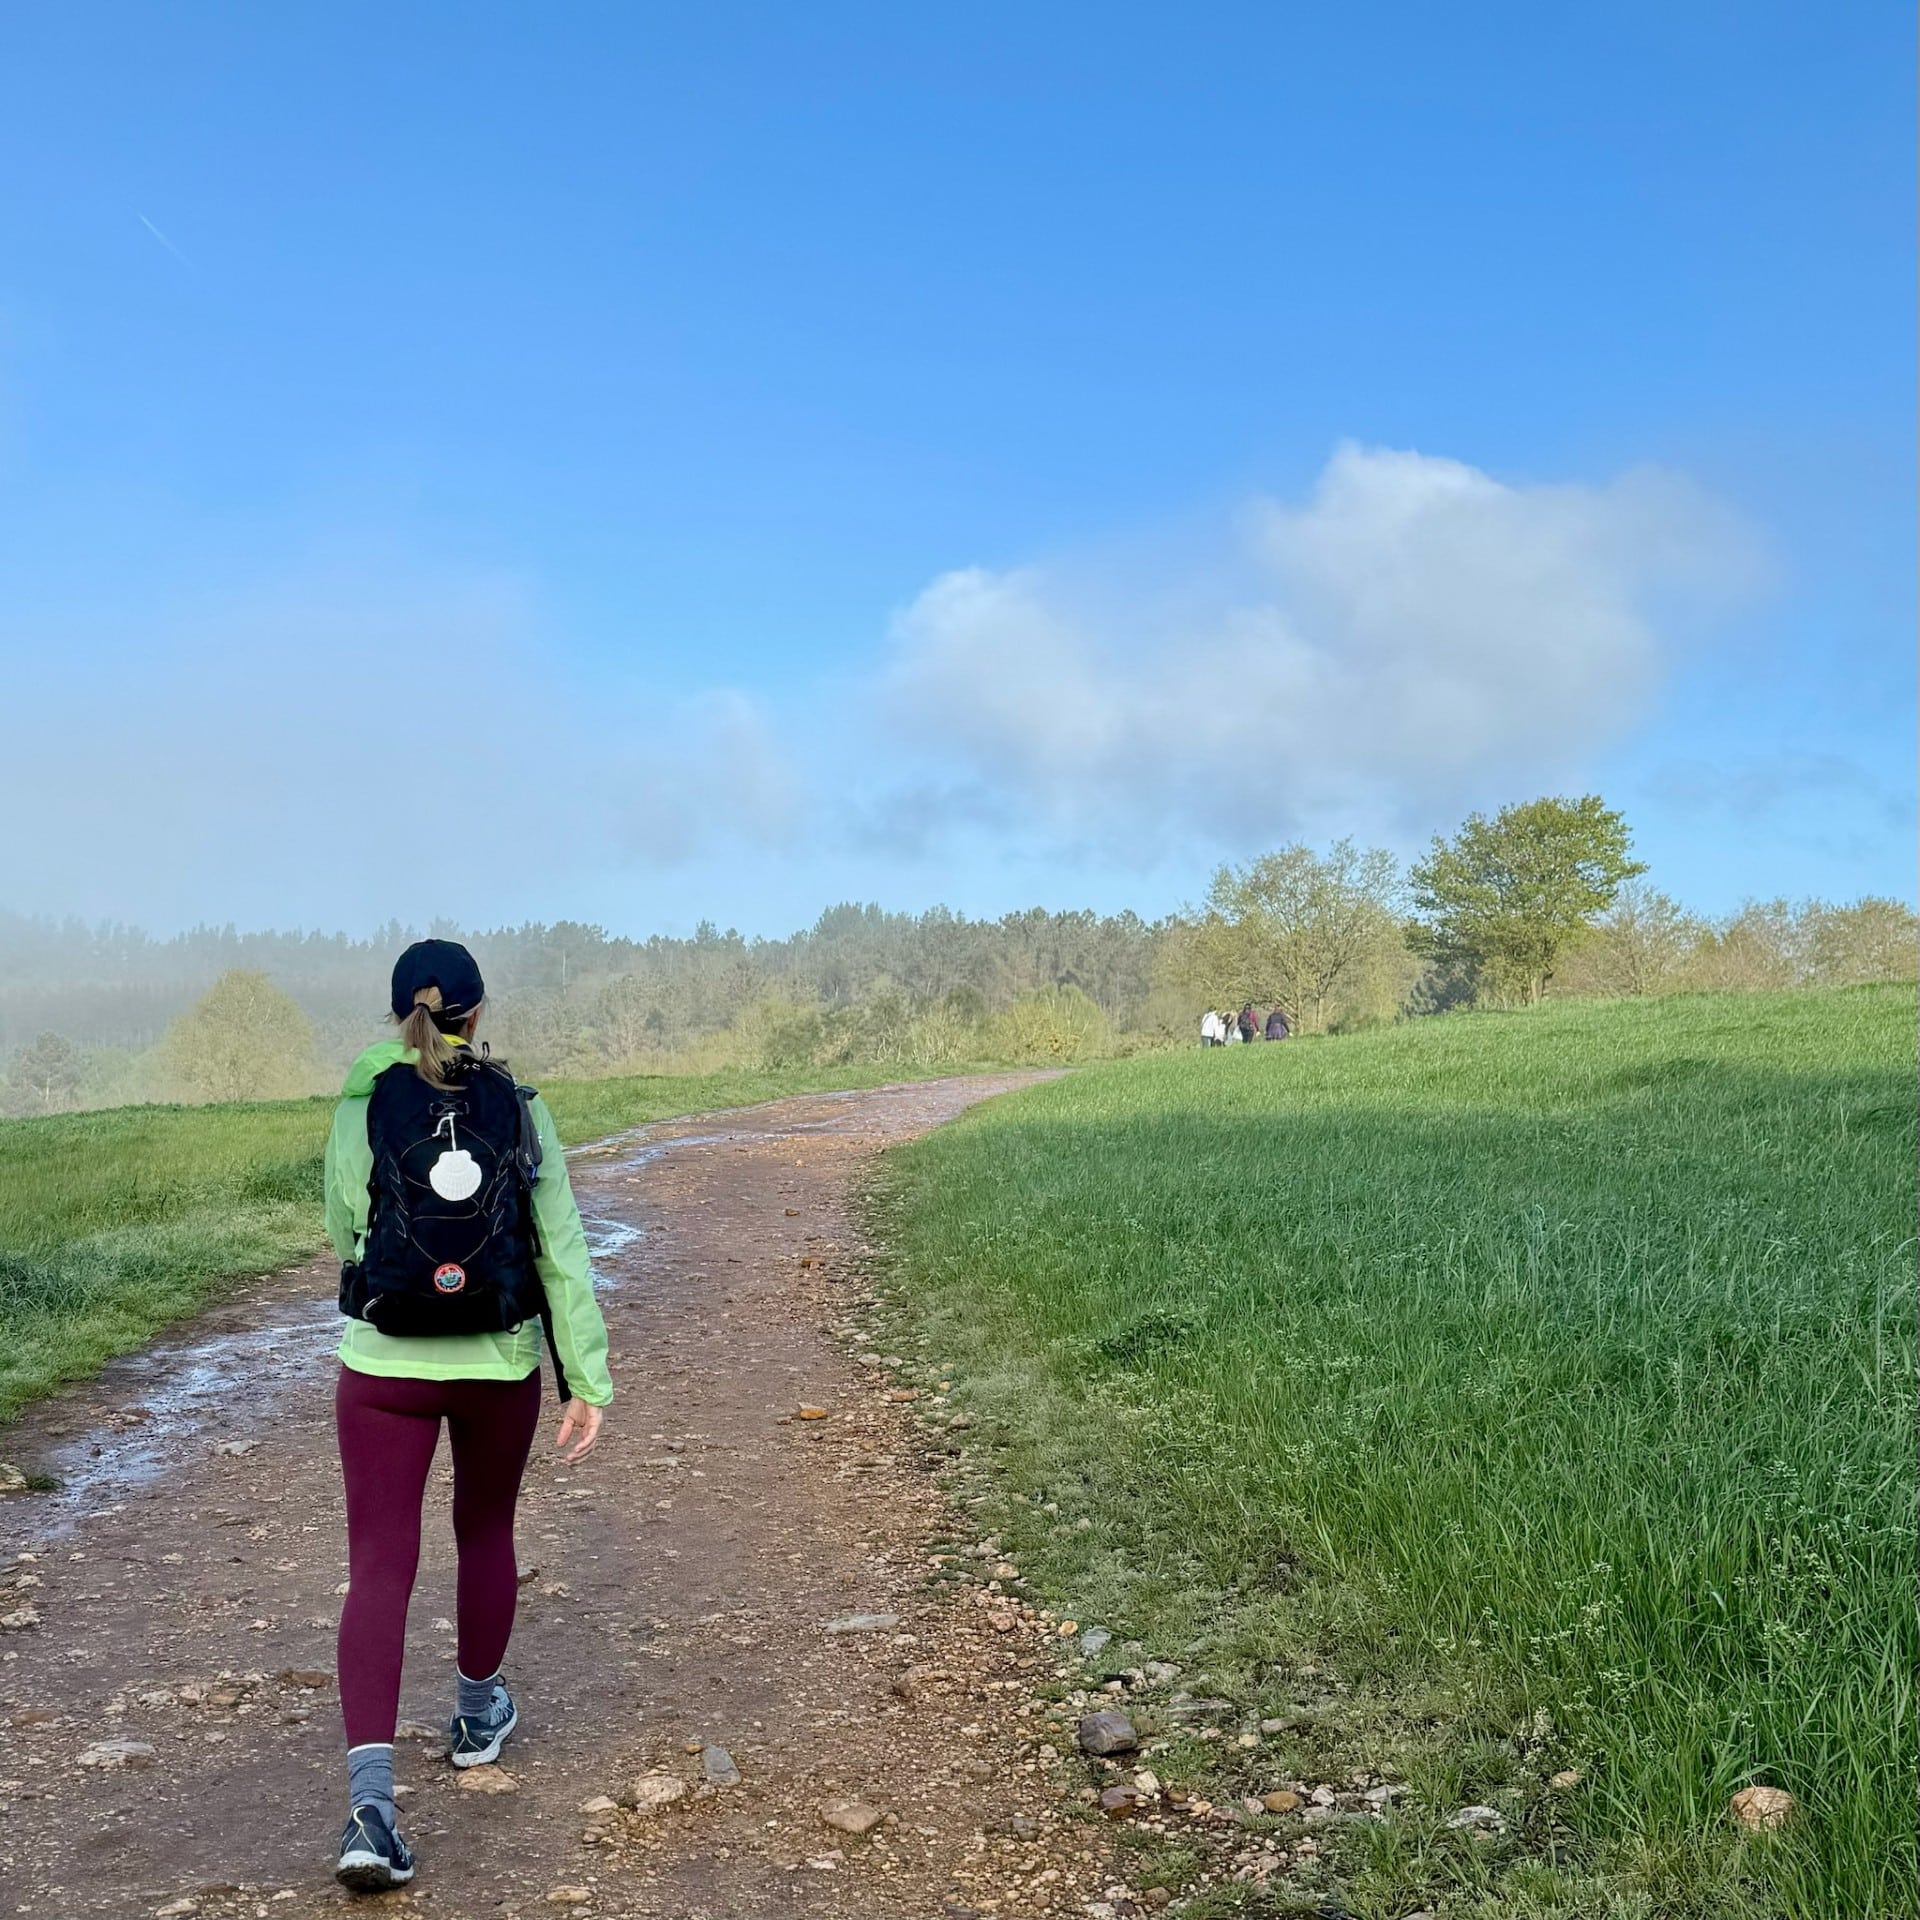 Classic Journeys' co-founder, Susie Piegza, hiking on a trail along the Camino de Santiago